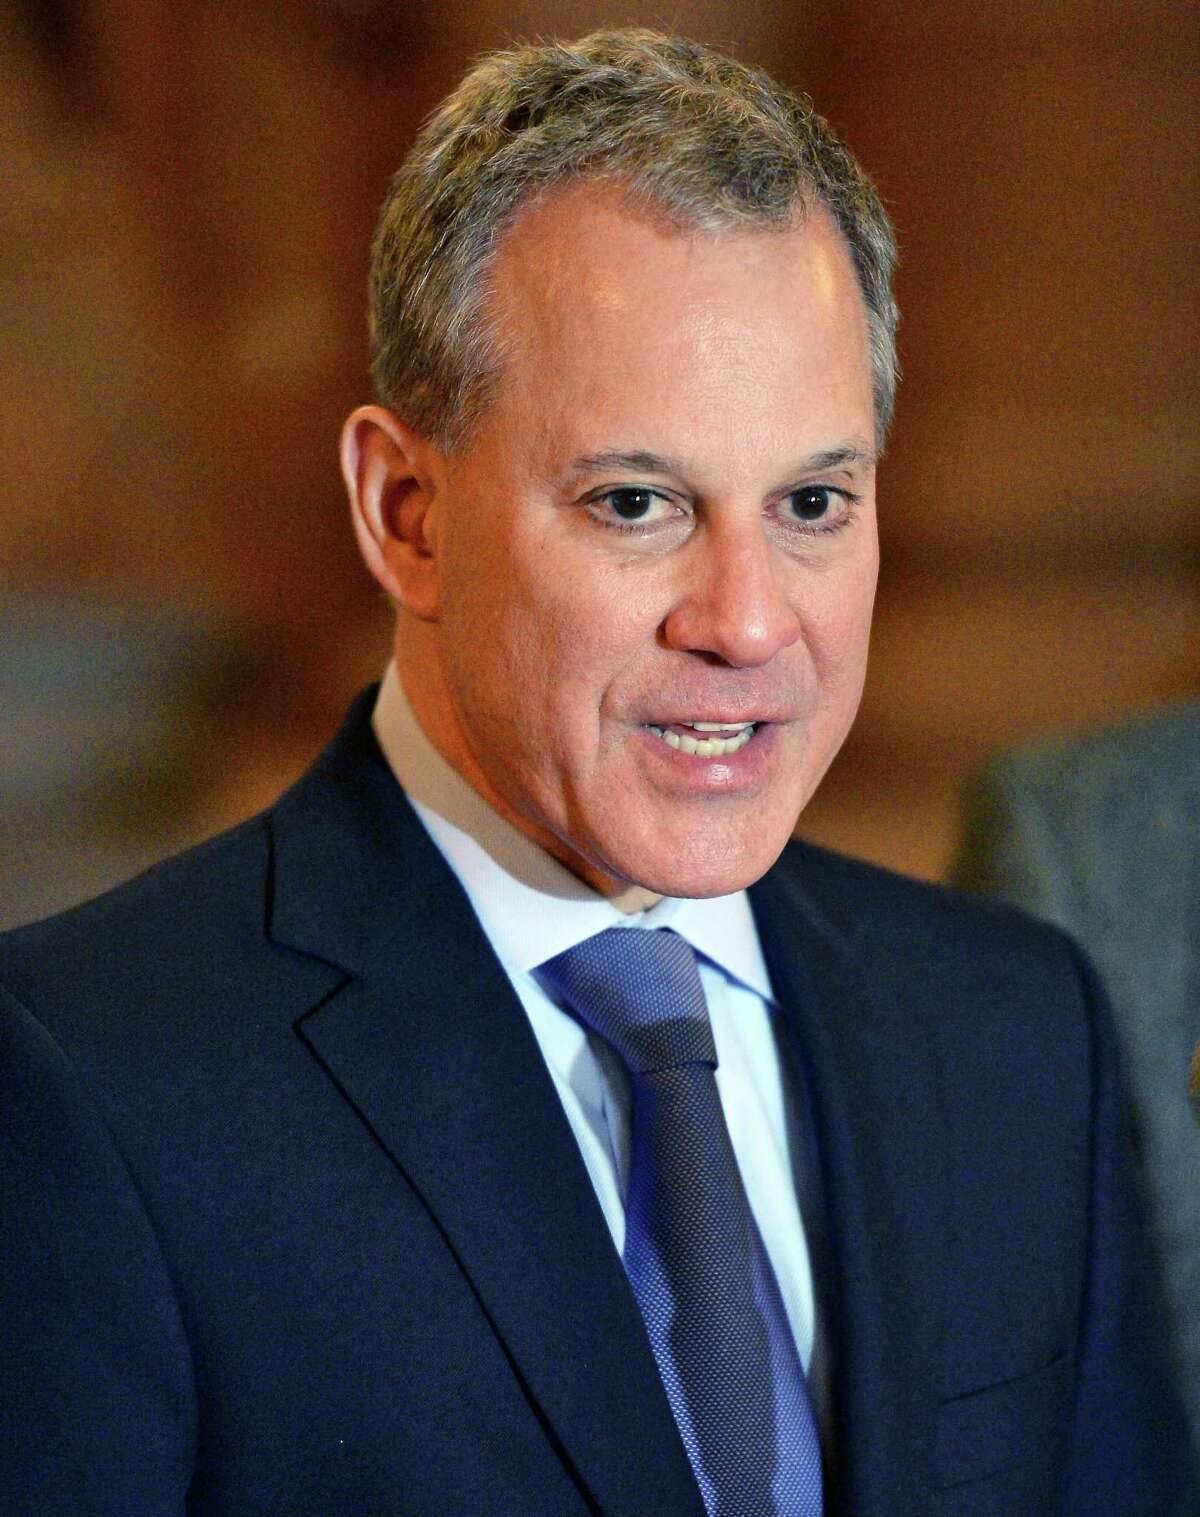 Attorney General Eric Schneiderman at the Capitol Tuesday Dec. 6, 2016 in Albany, NY. (John Carl D'Annibale / Times Union)